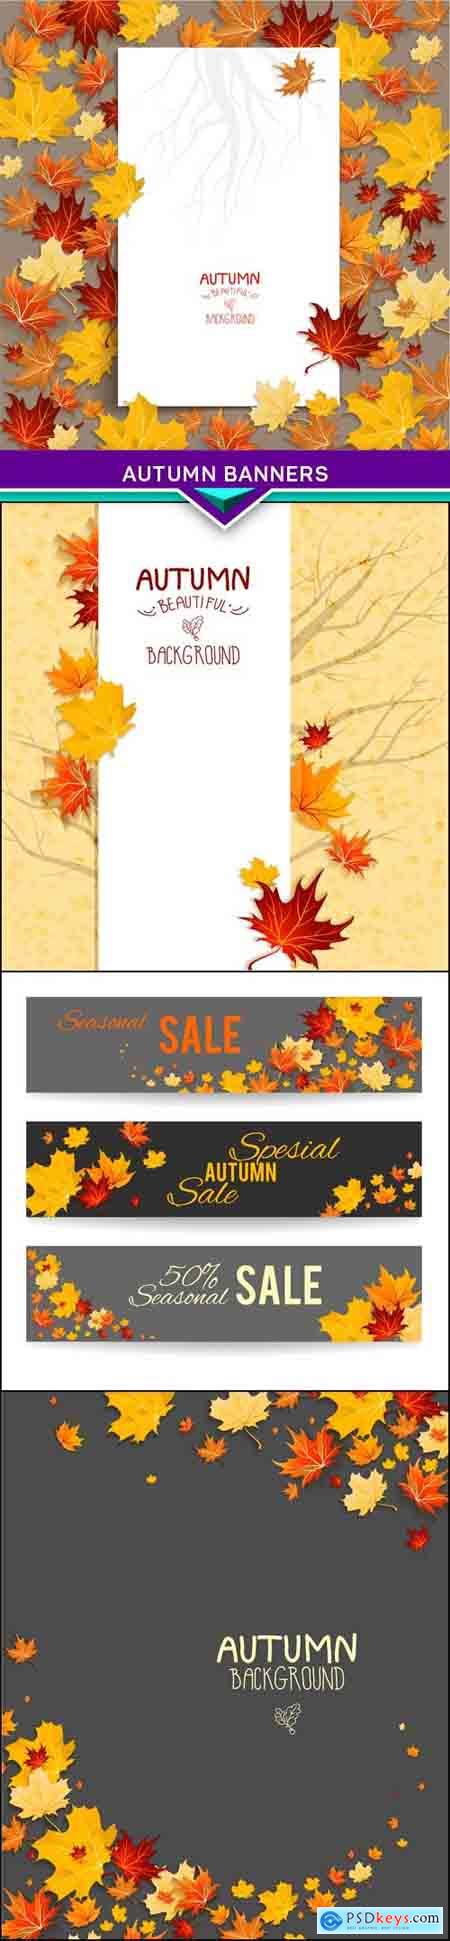 Autumn banners 5X EPS